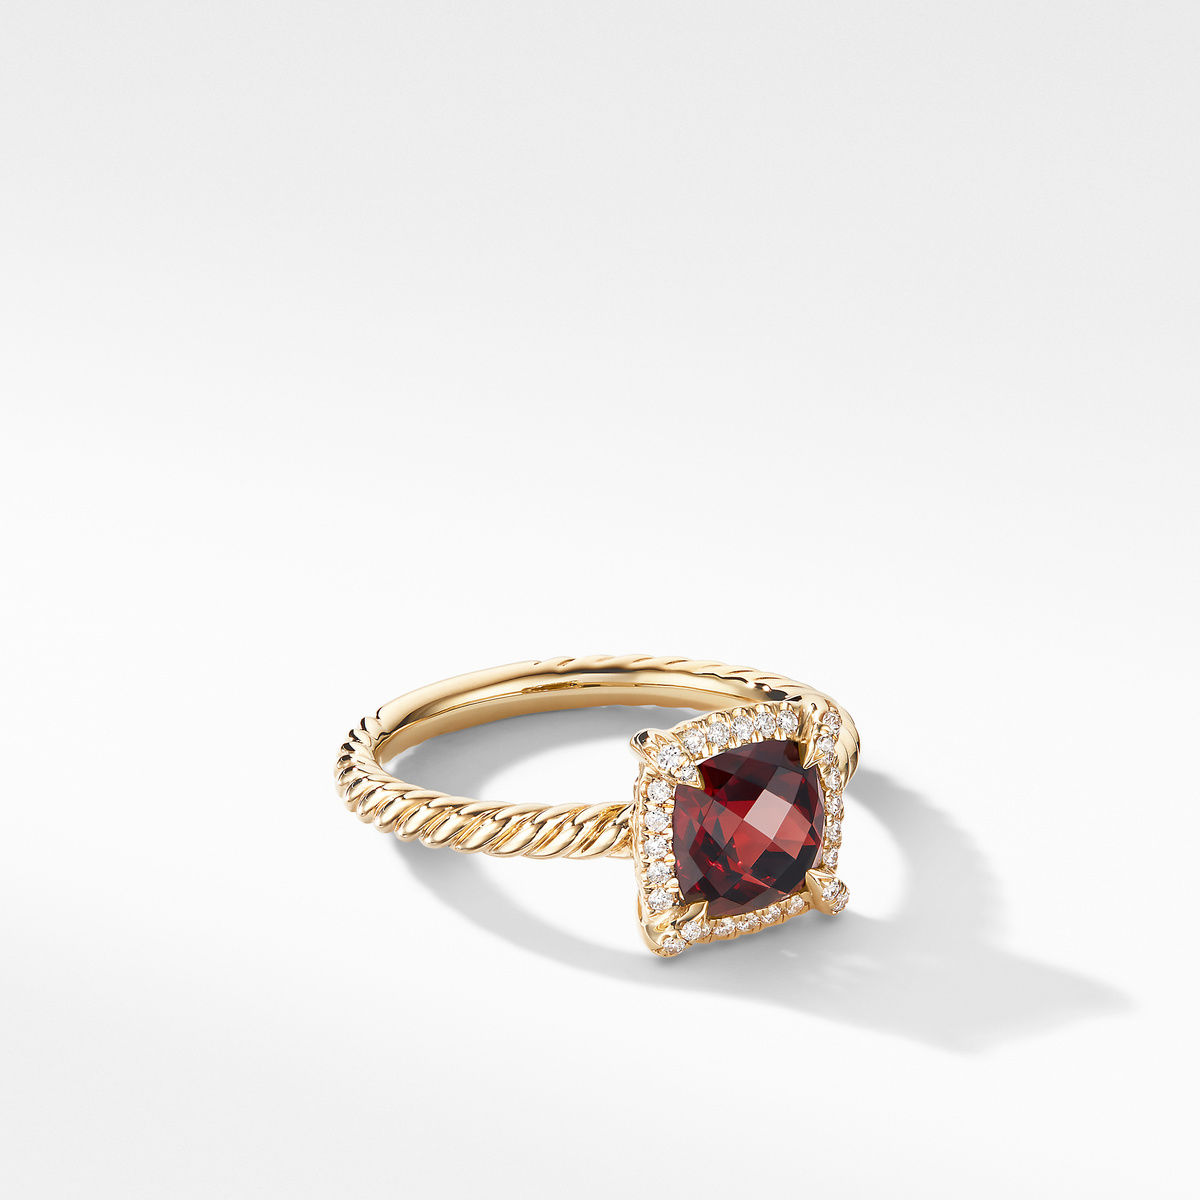 David YurmanPetite Chatelaine Pave Bezel Ring in 18K Yellow Gold with Garnet and Diamonds - Size 5